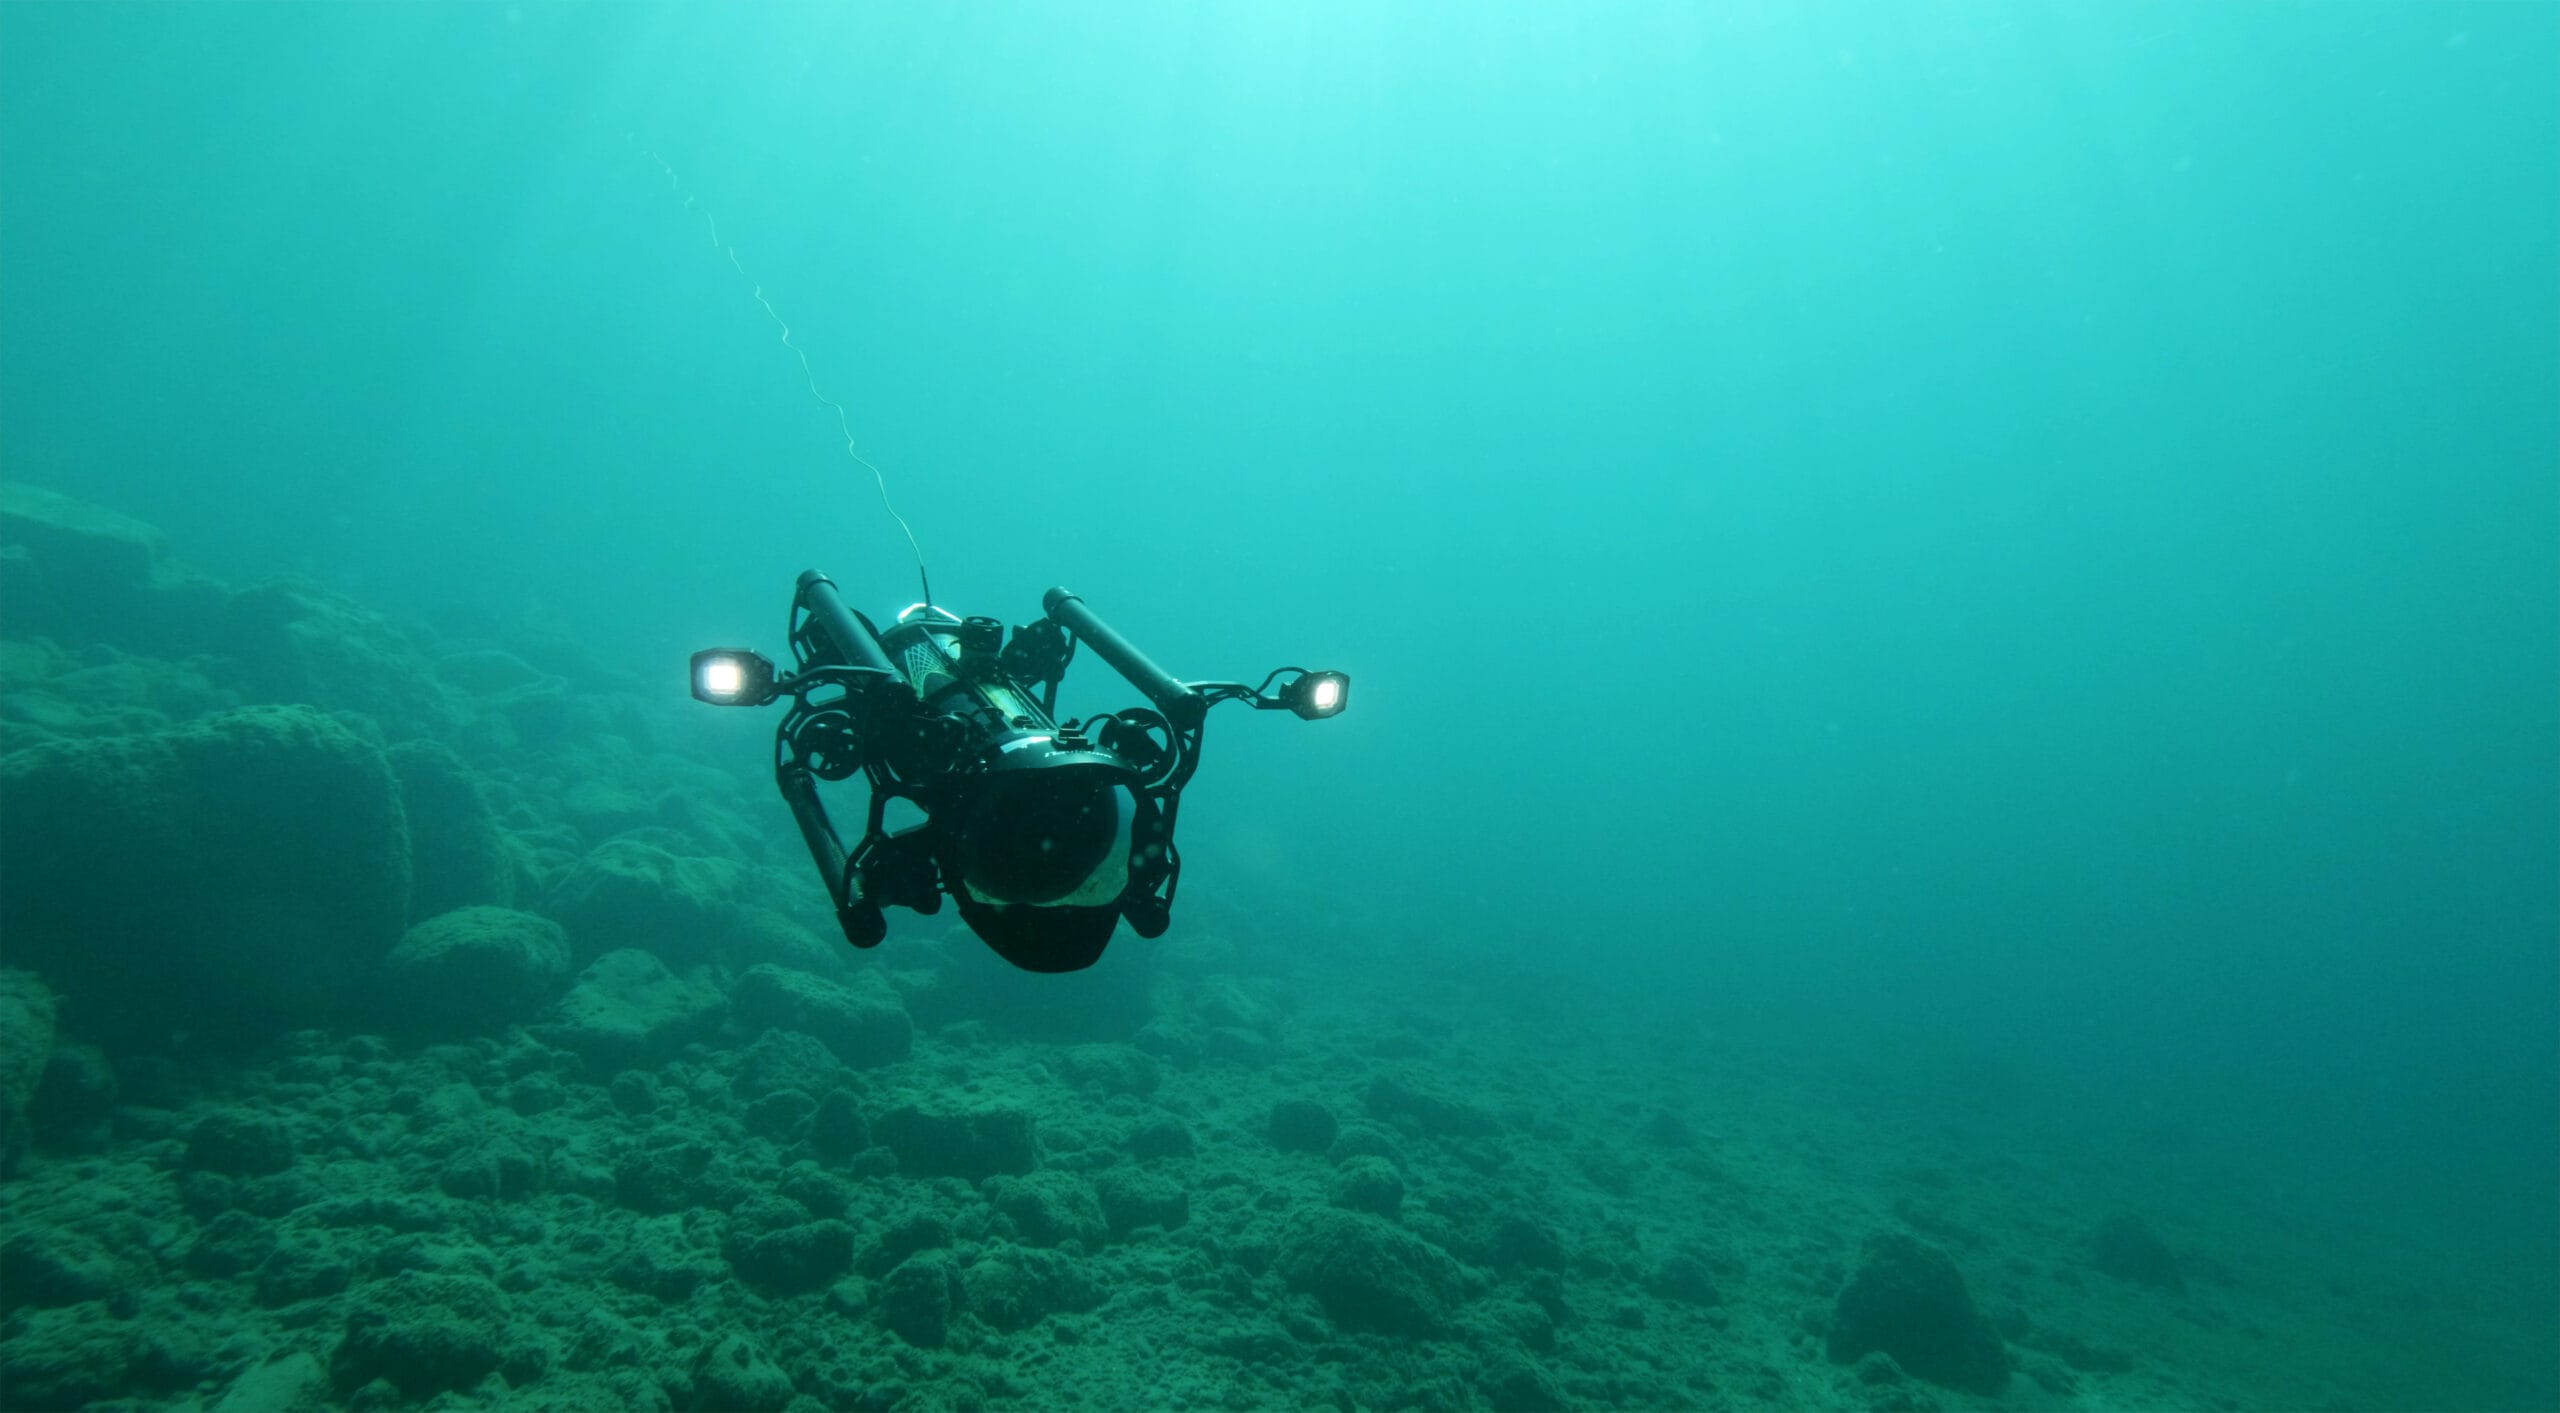 An ROV floats need the bottom of a lake